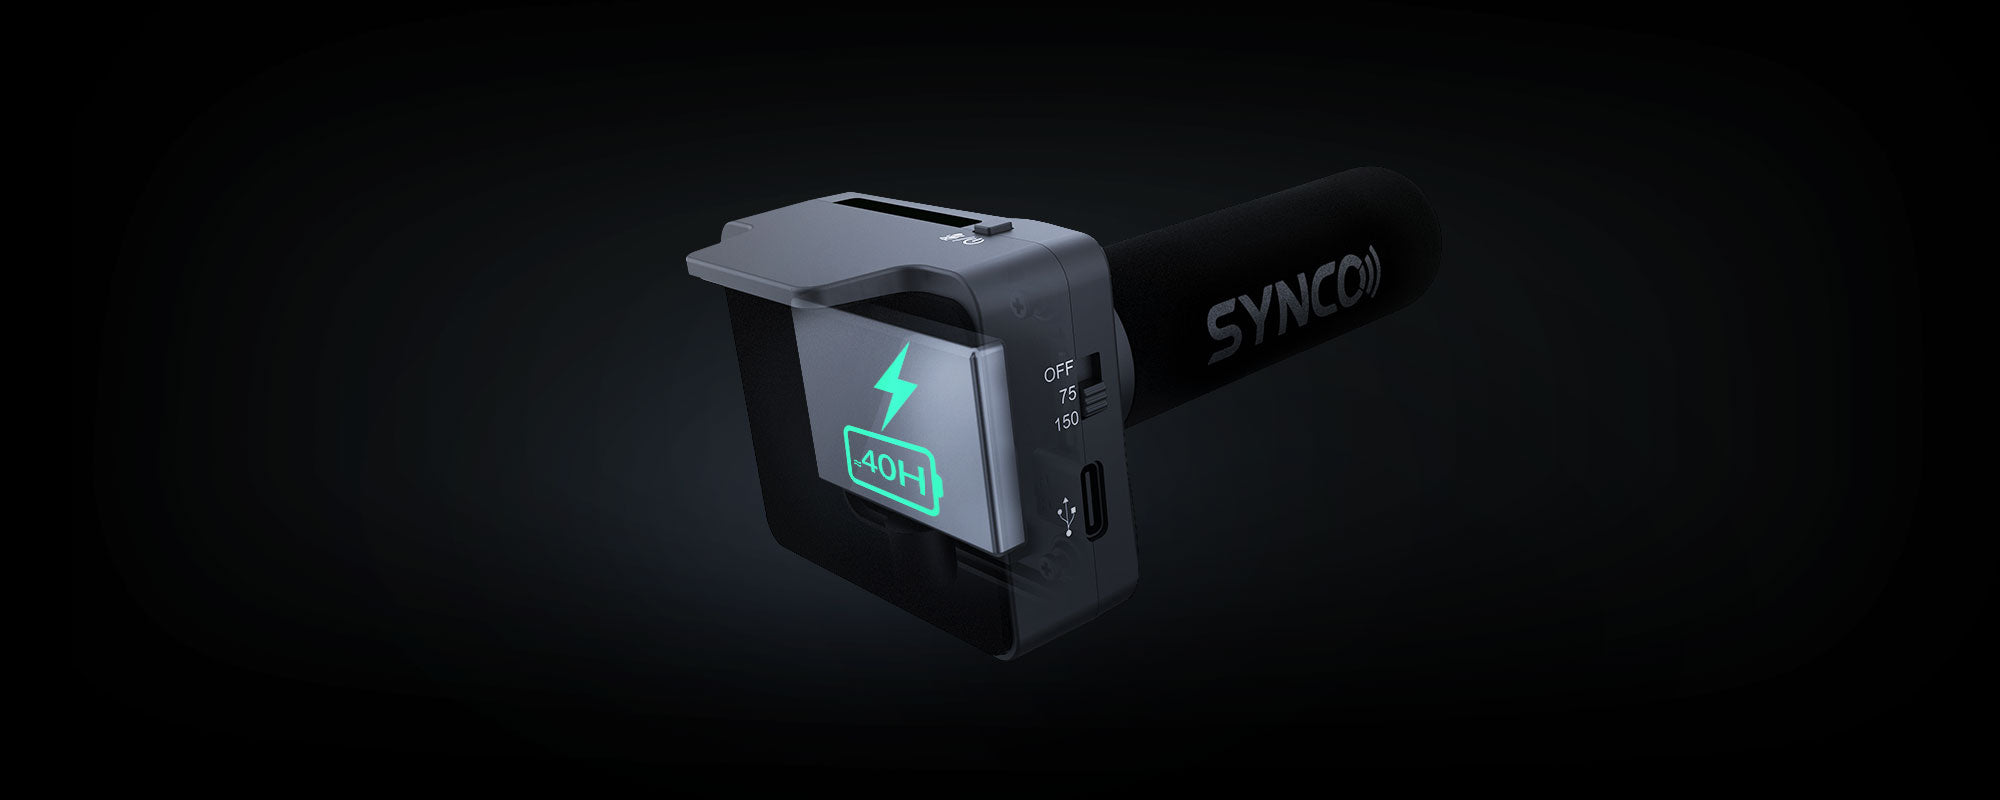 SYNCO U3 supports 40 hours of working time.